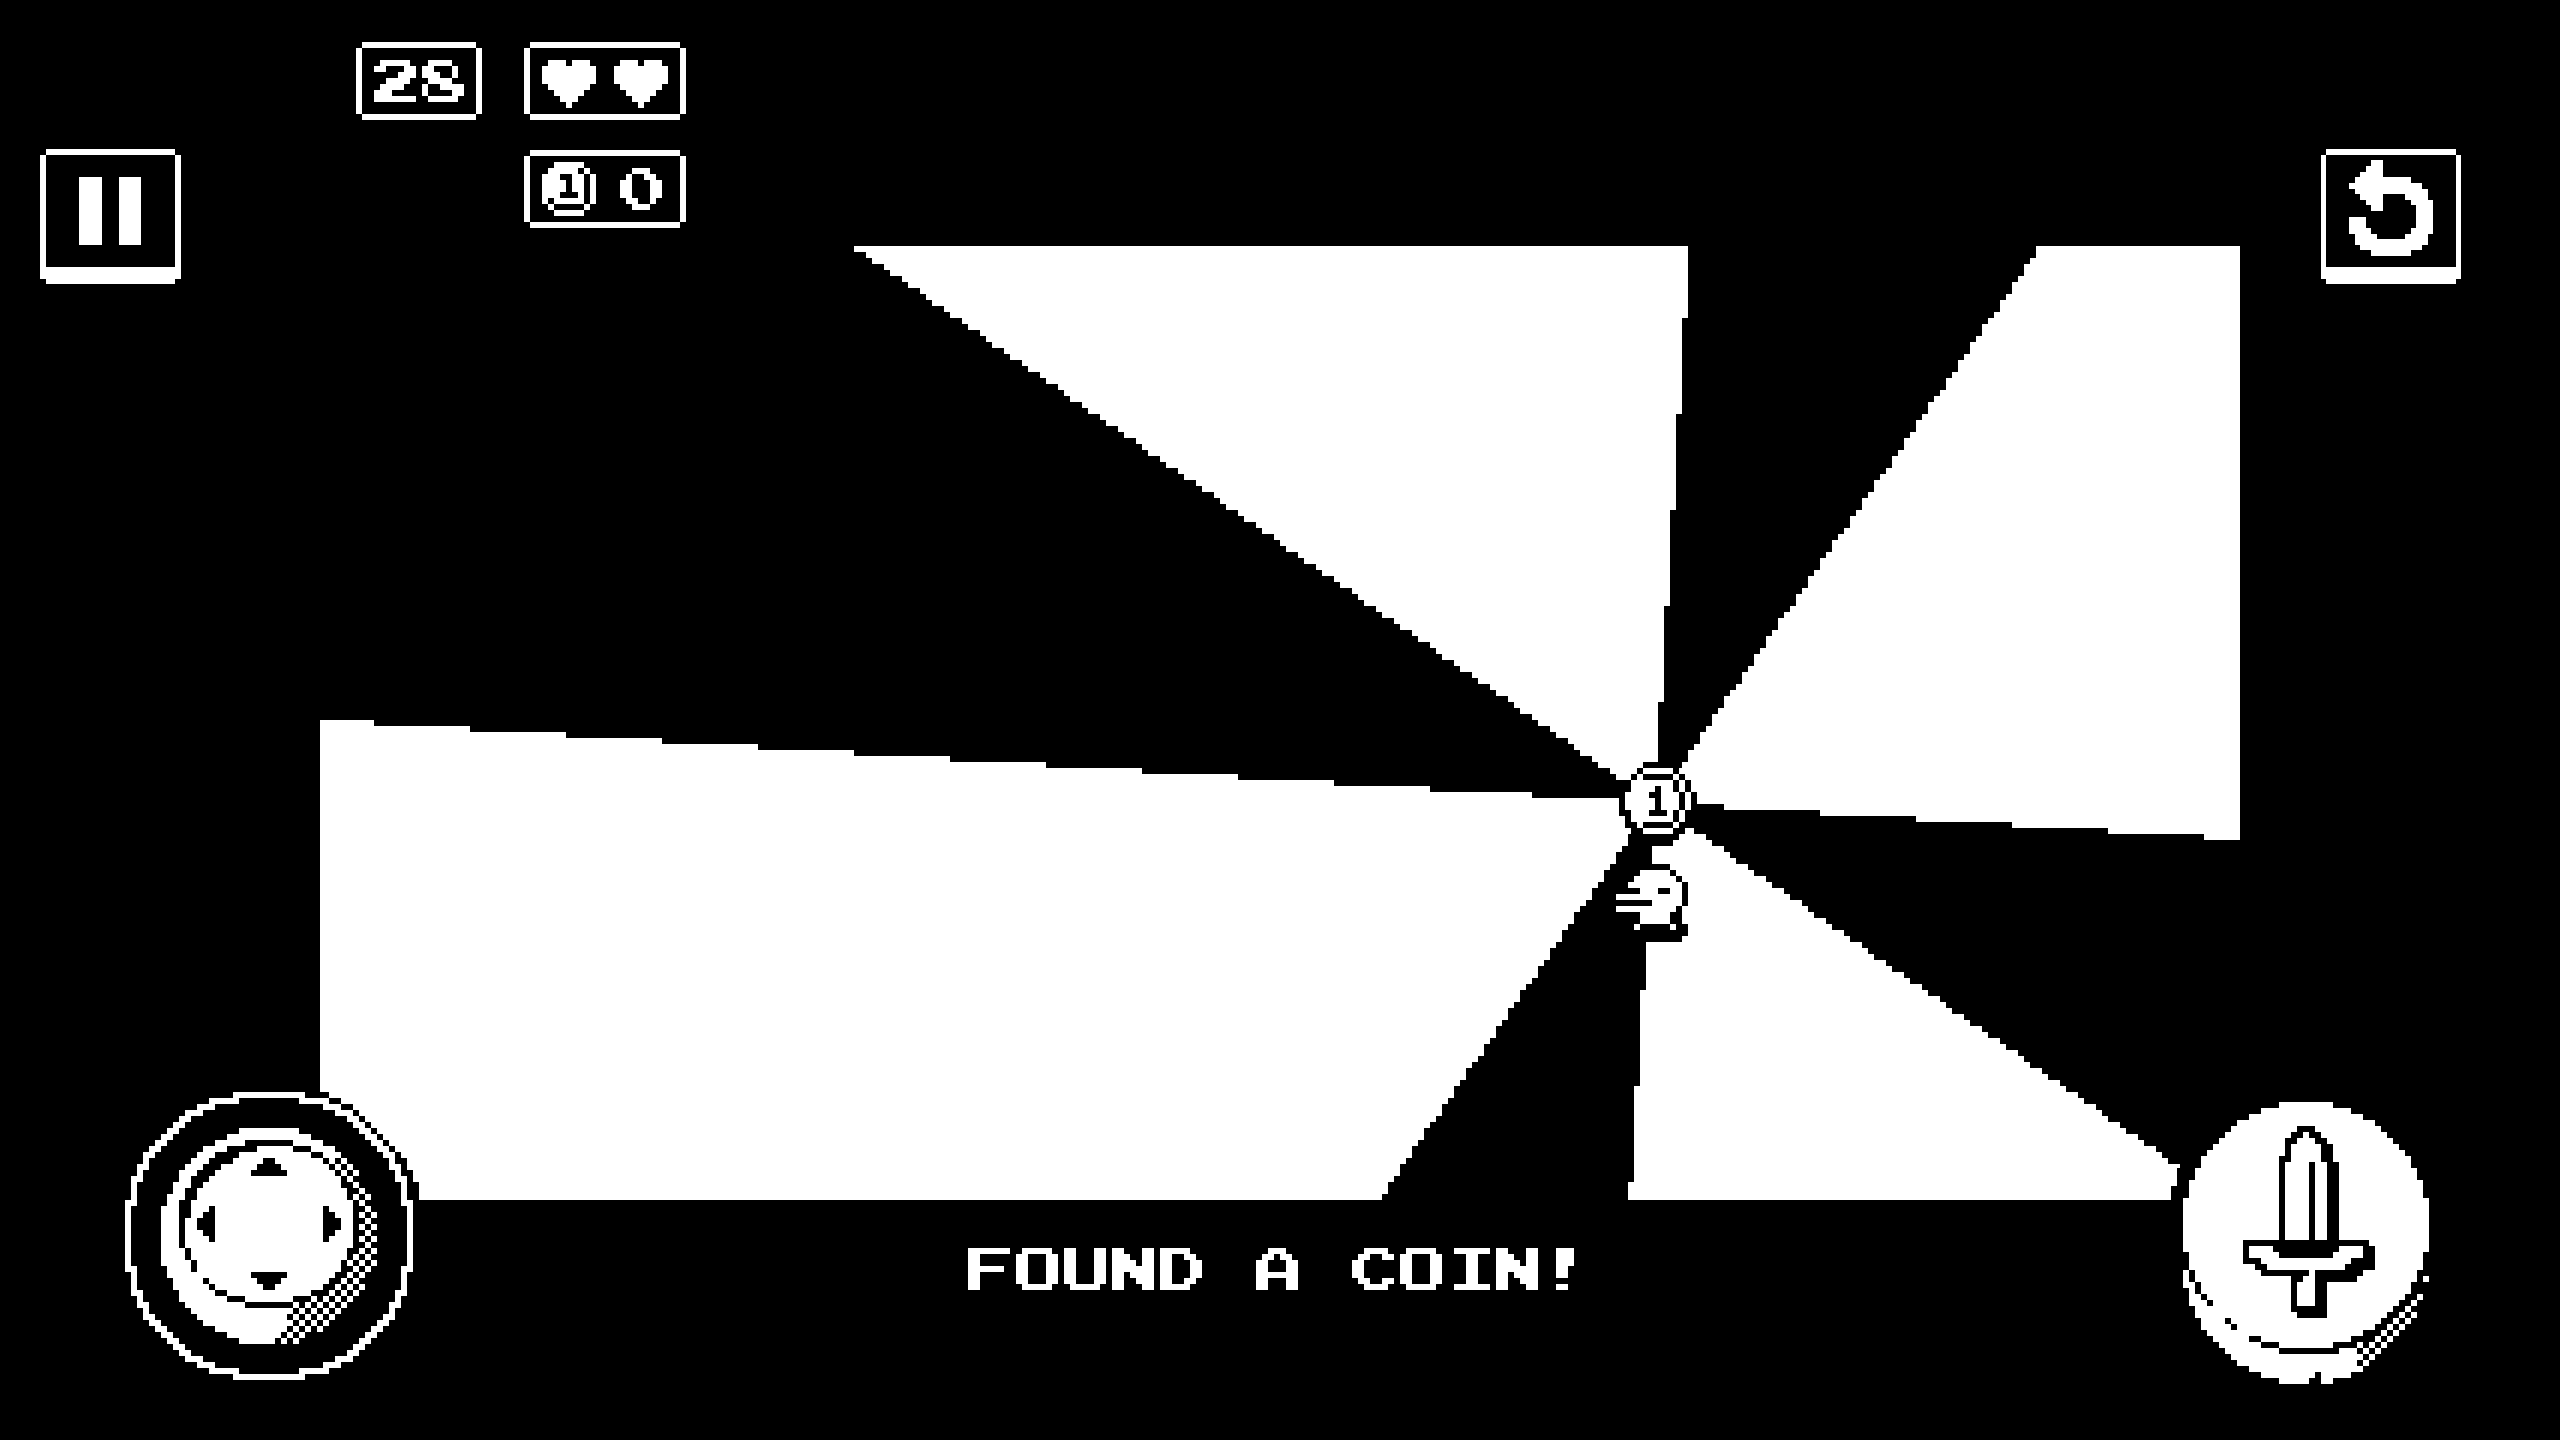 Minit finding a coin